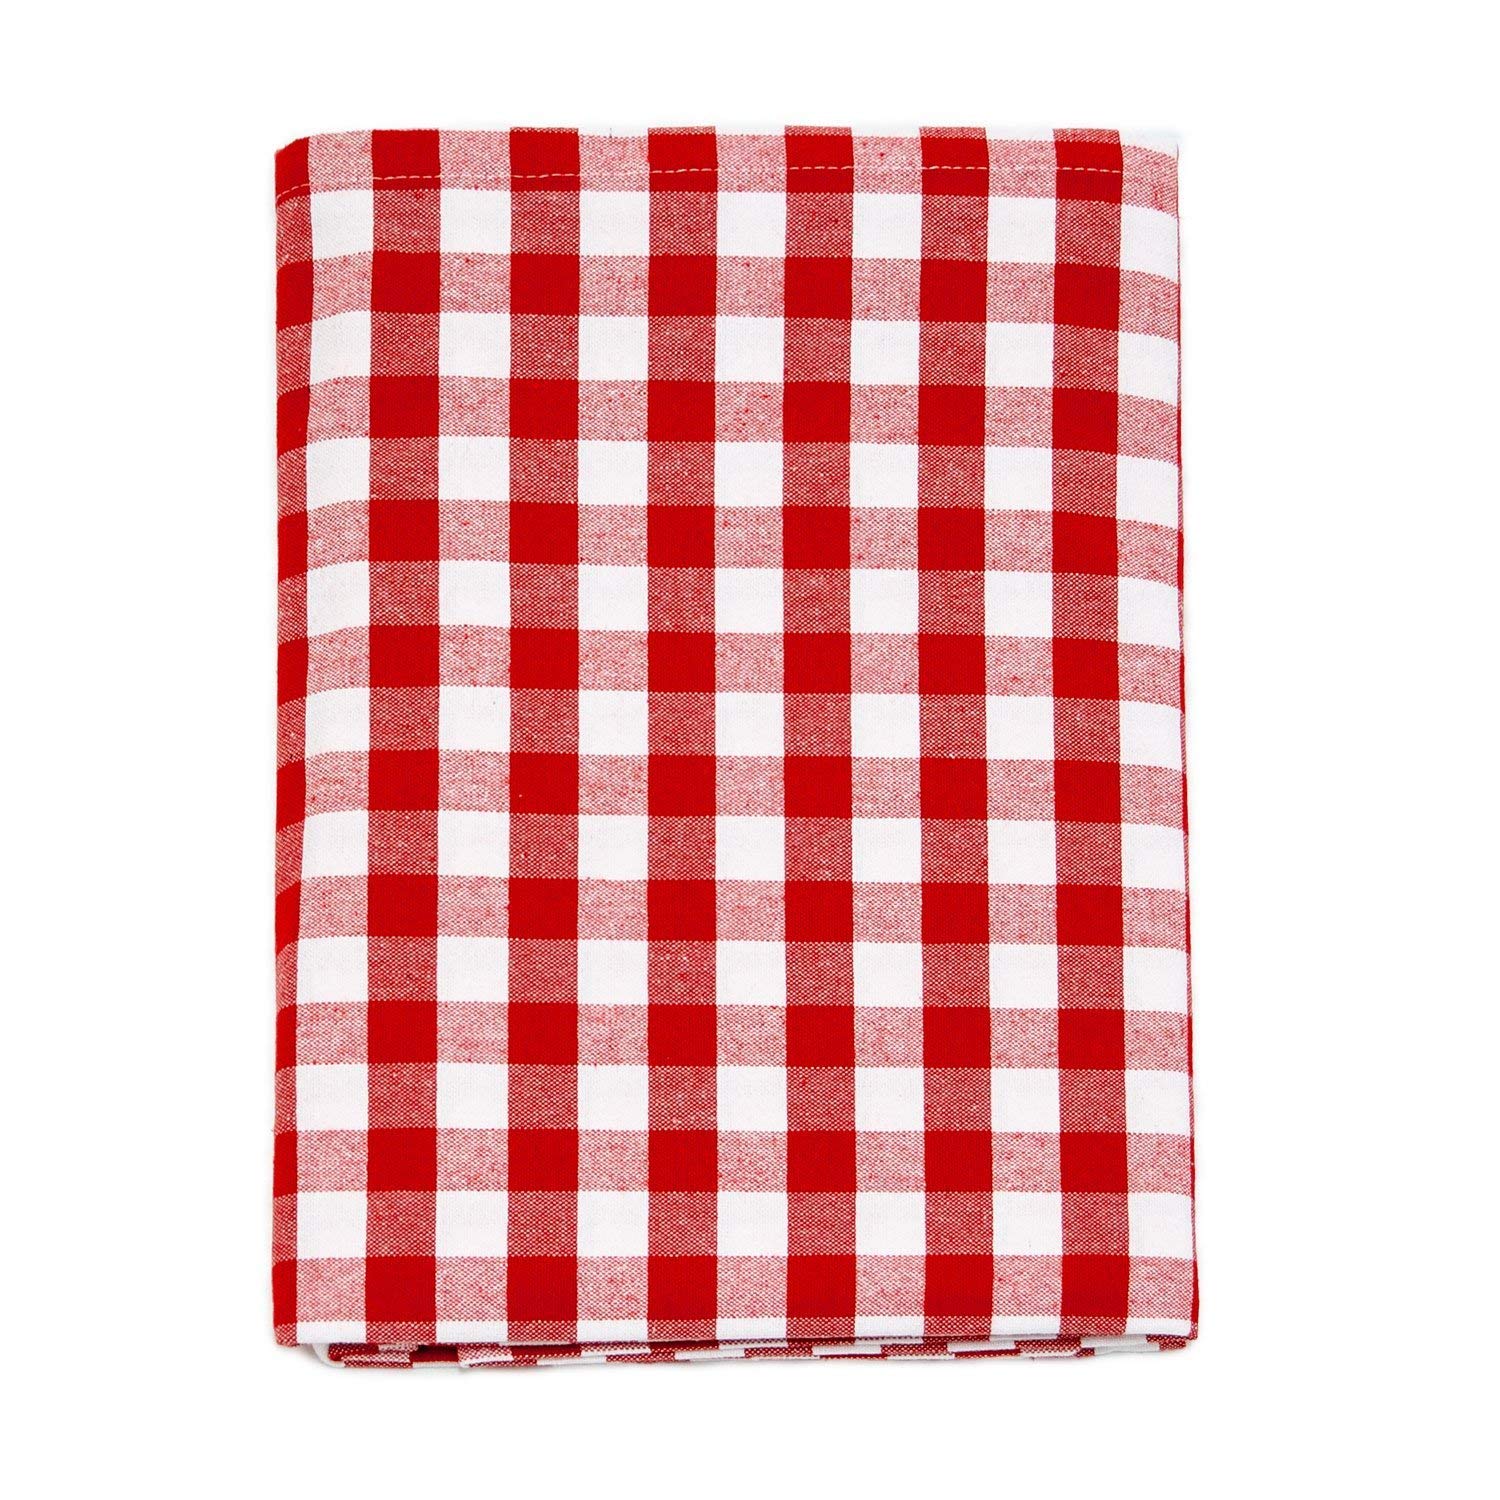 White and Red Rectangle Logo - BgEurope PIZZERIA CHESS TABLECLOTH - RECTANGLE - 100% COTTON - RED ...